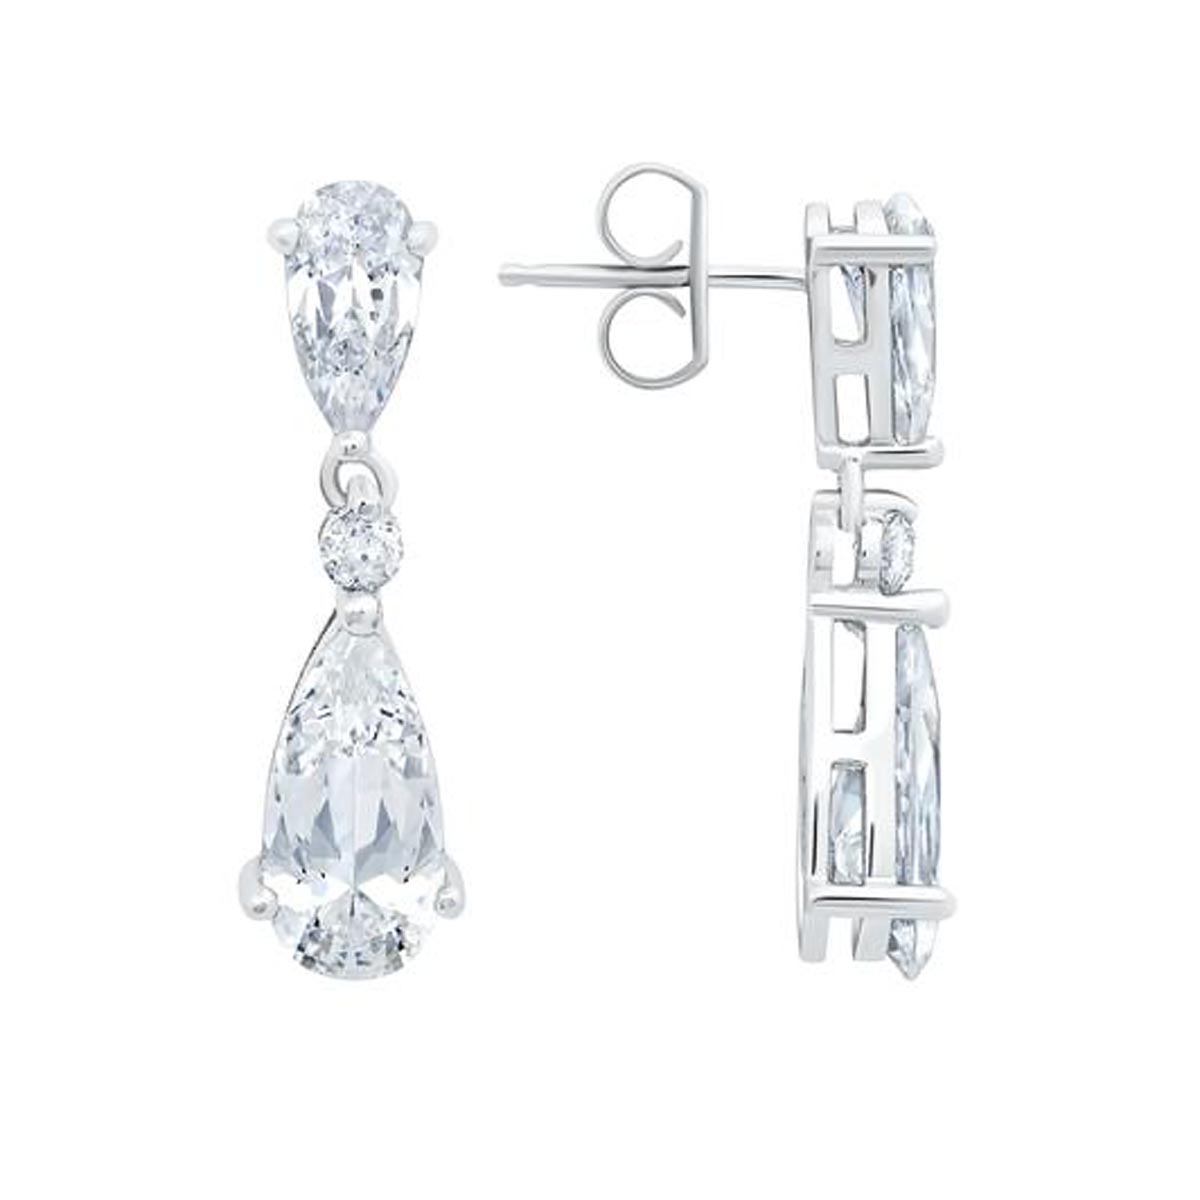 Crislu Cubic Zirconia Double Pear Drop Earring in Sterling Silver with Platinum Finish